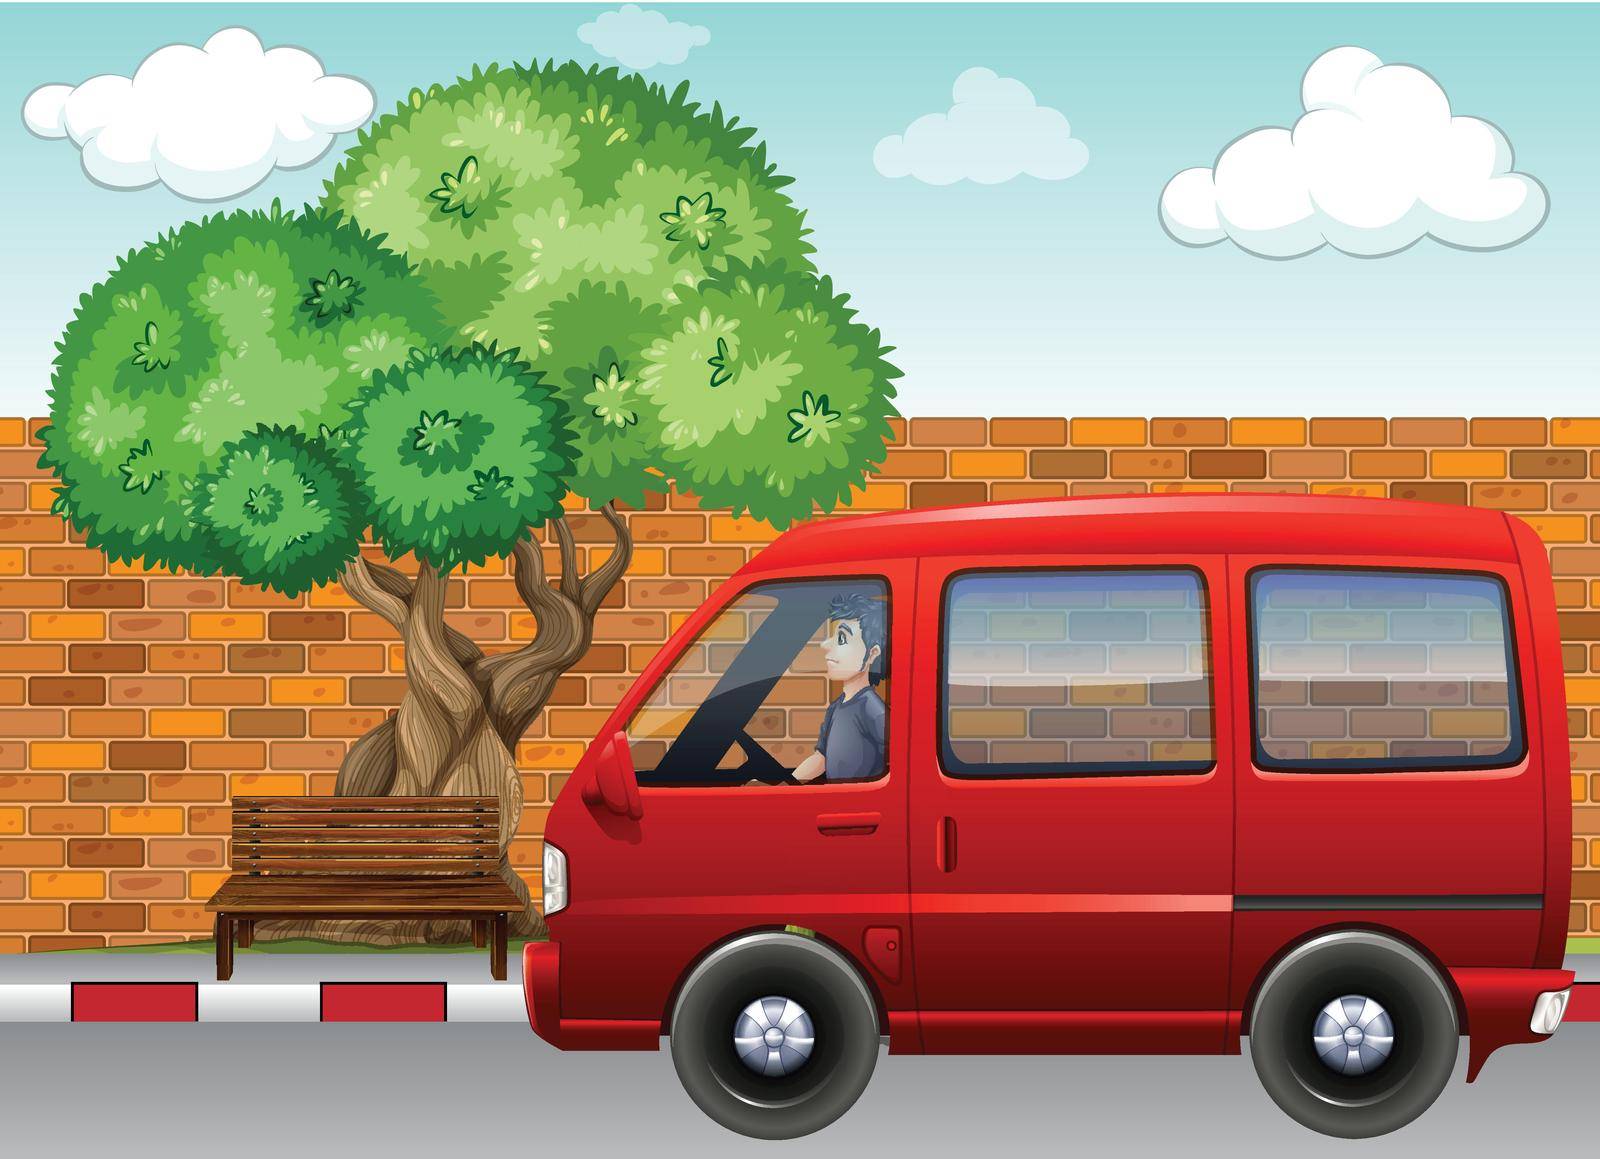 Red van parking on a street near a bench and a tree